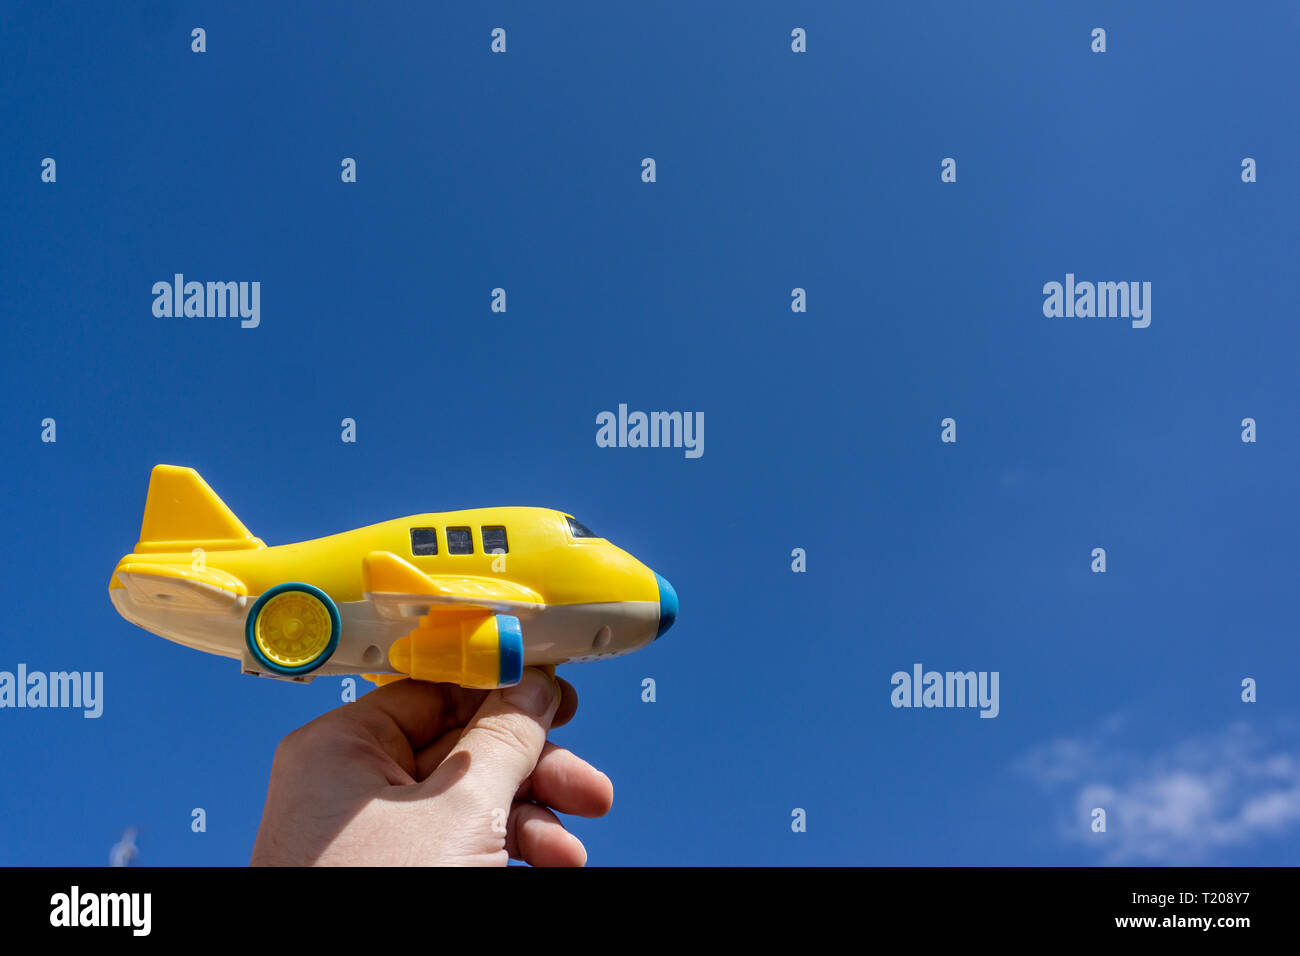 Yellow toy plane flying in to the beautiful blue sky, negative space, concept of going on a magical holiday, dream destination Stock Photo